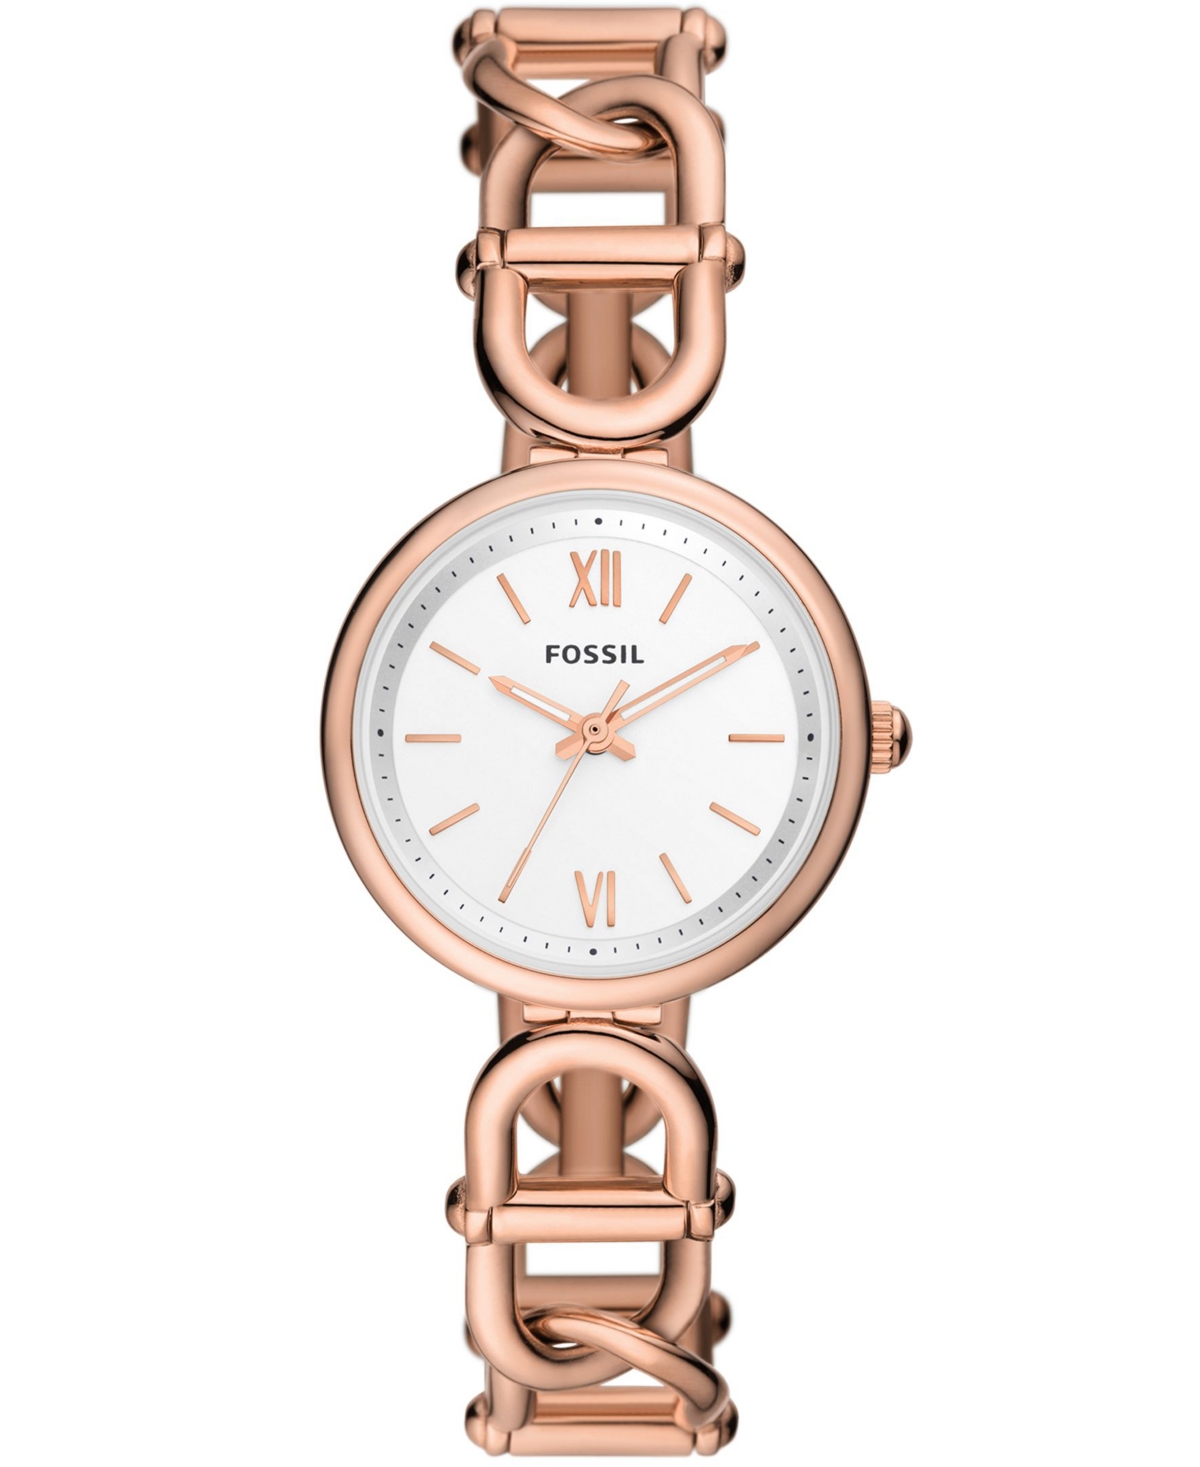 Fossil Women's Carlie Three-hand Rose Gold-tone Stainless Steel Watch, 30mm In Rose Gold Tone